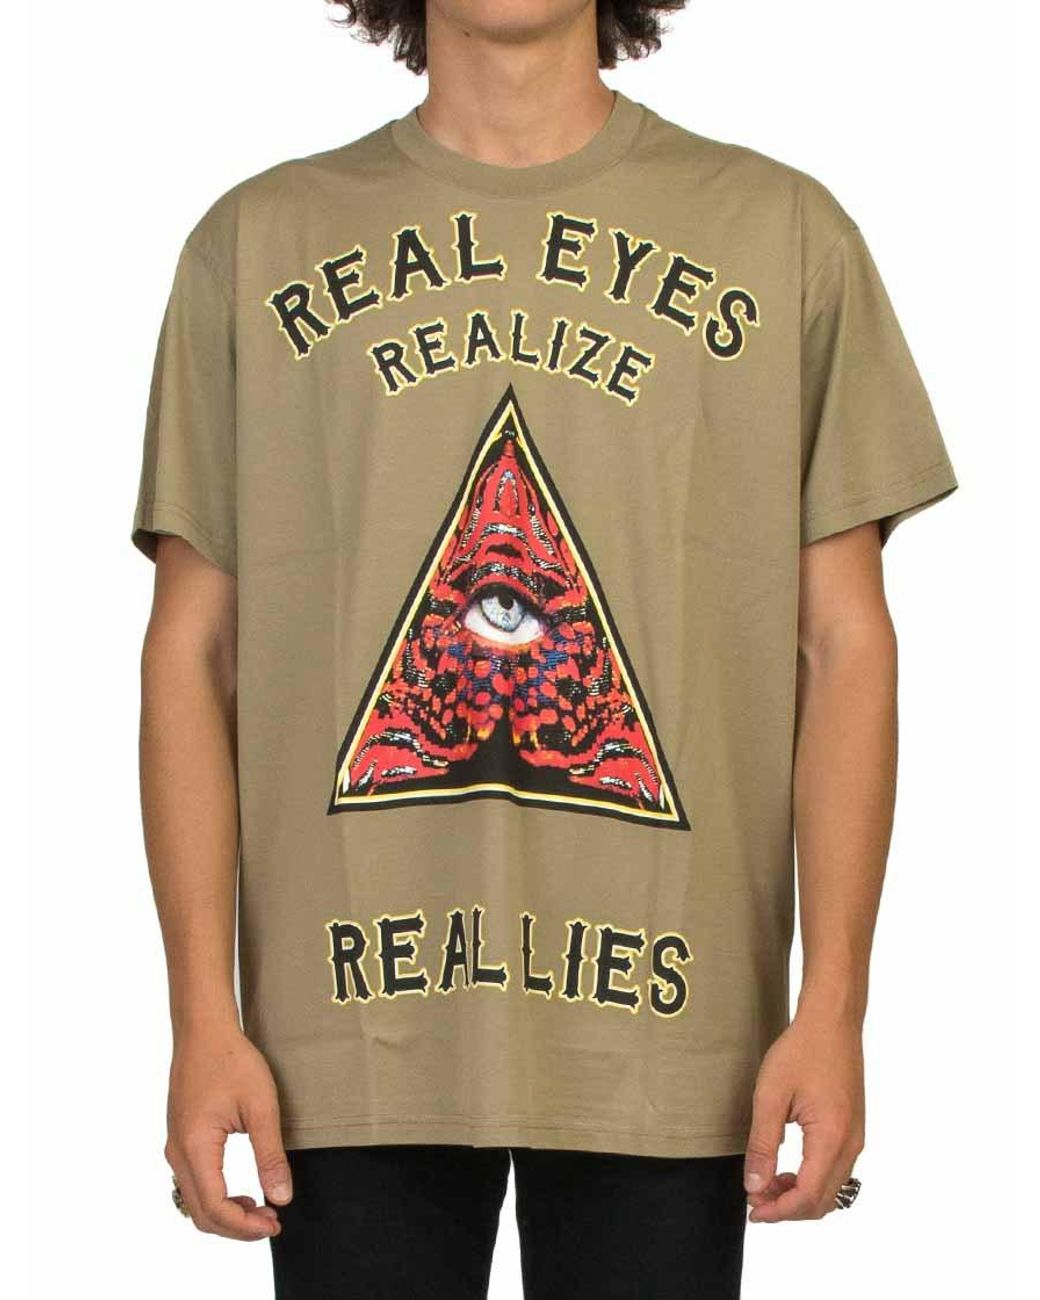 Total 57+ imagen real eyes realize real lies t shirt givenchy